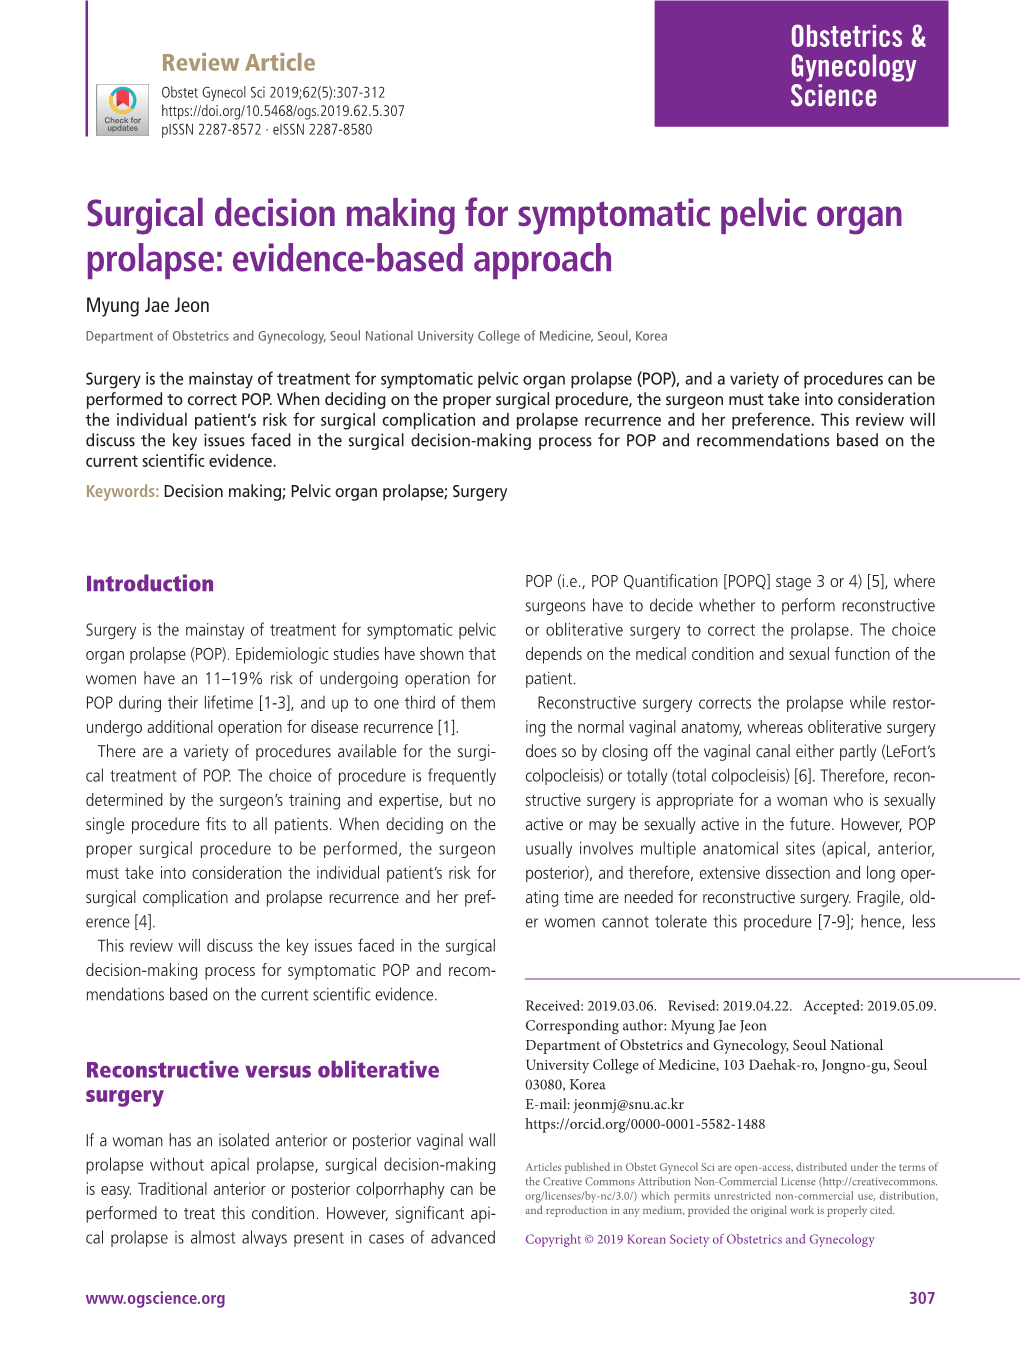 Surgical Decision Making for Symptomatic